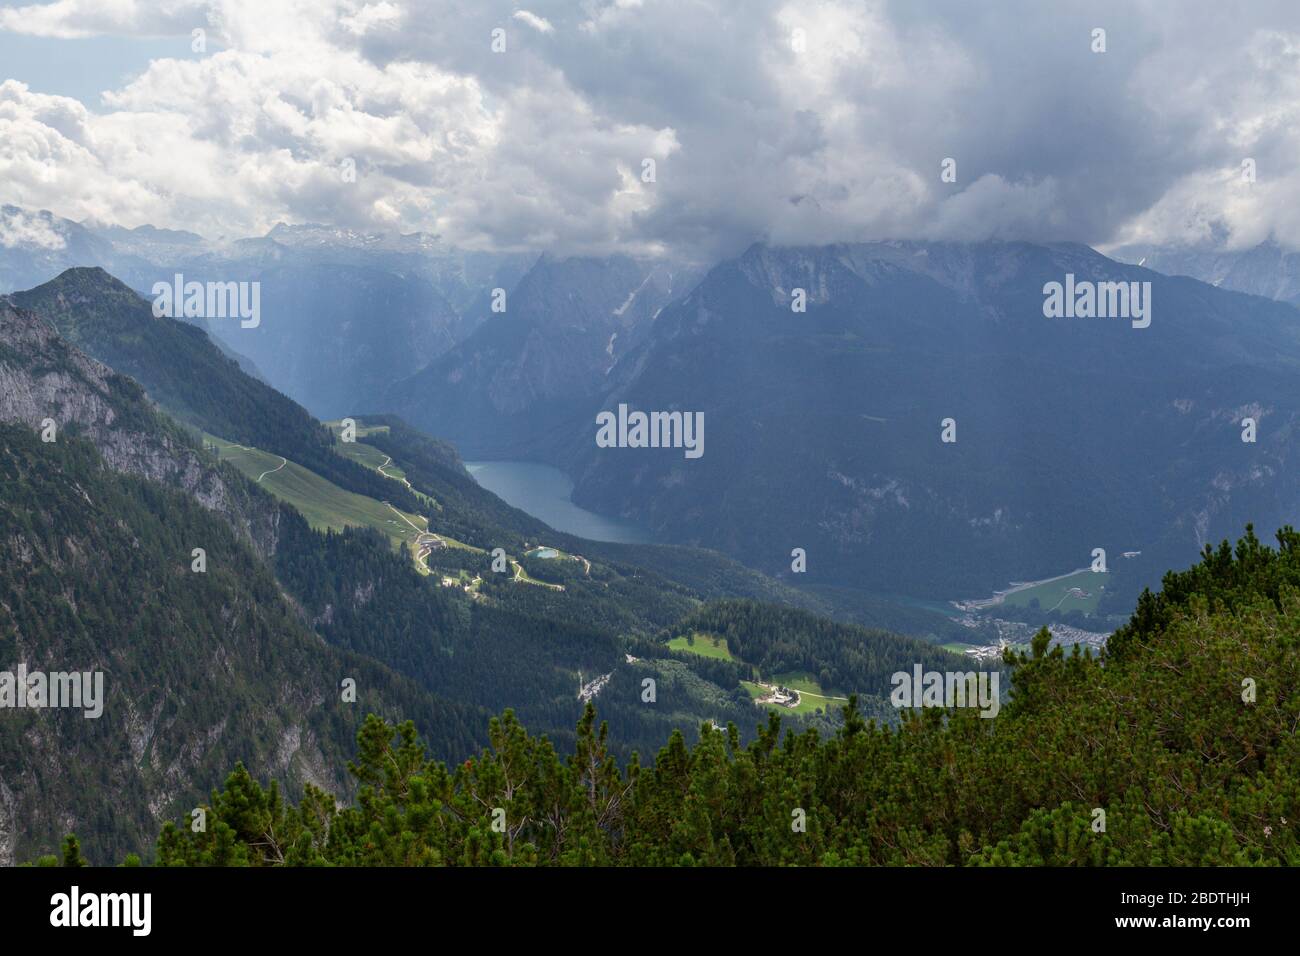 View towards Königssee from the Eagle's Nest, Berchtesgaden, Bavaria, Germany. Stock Photo